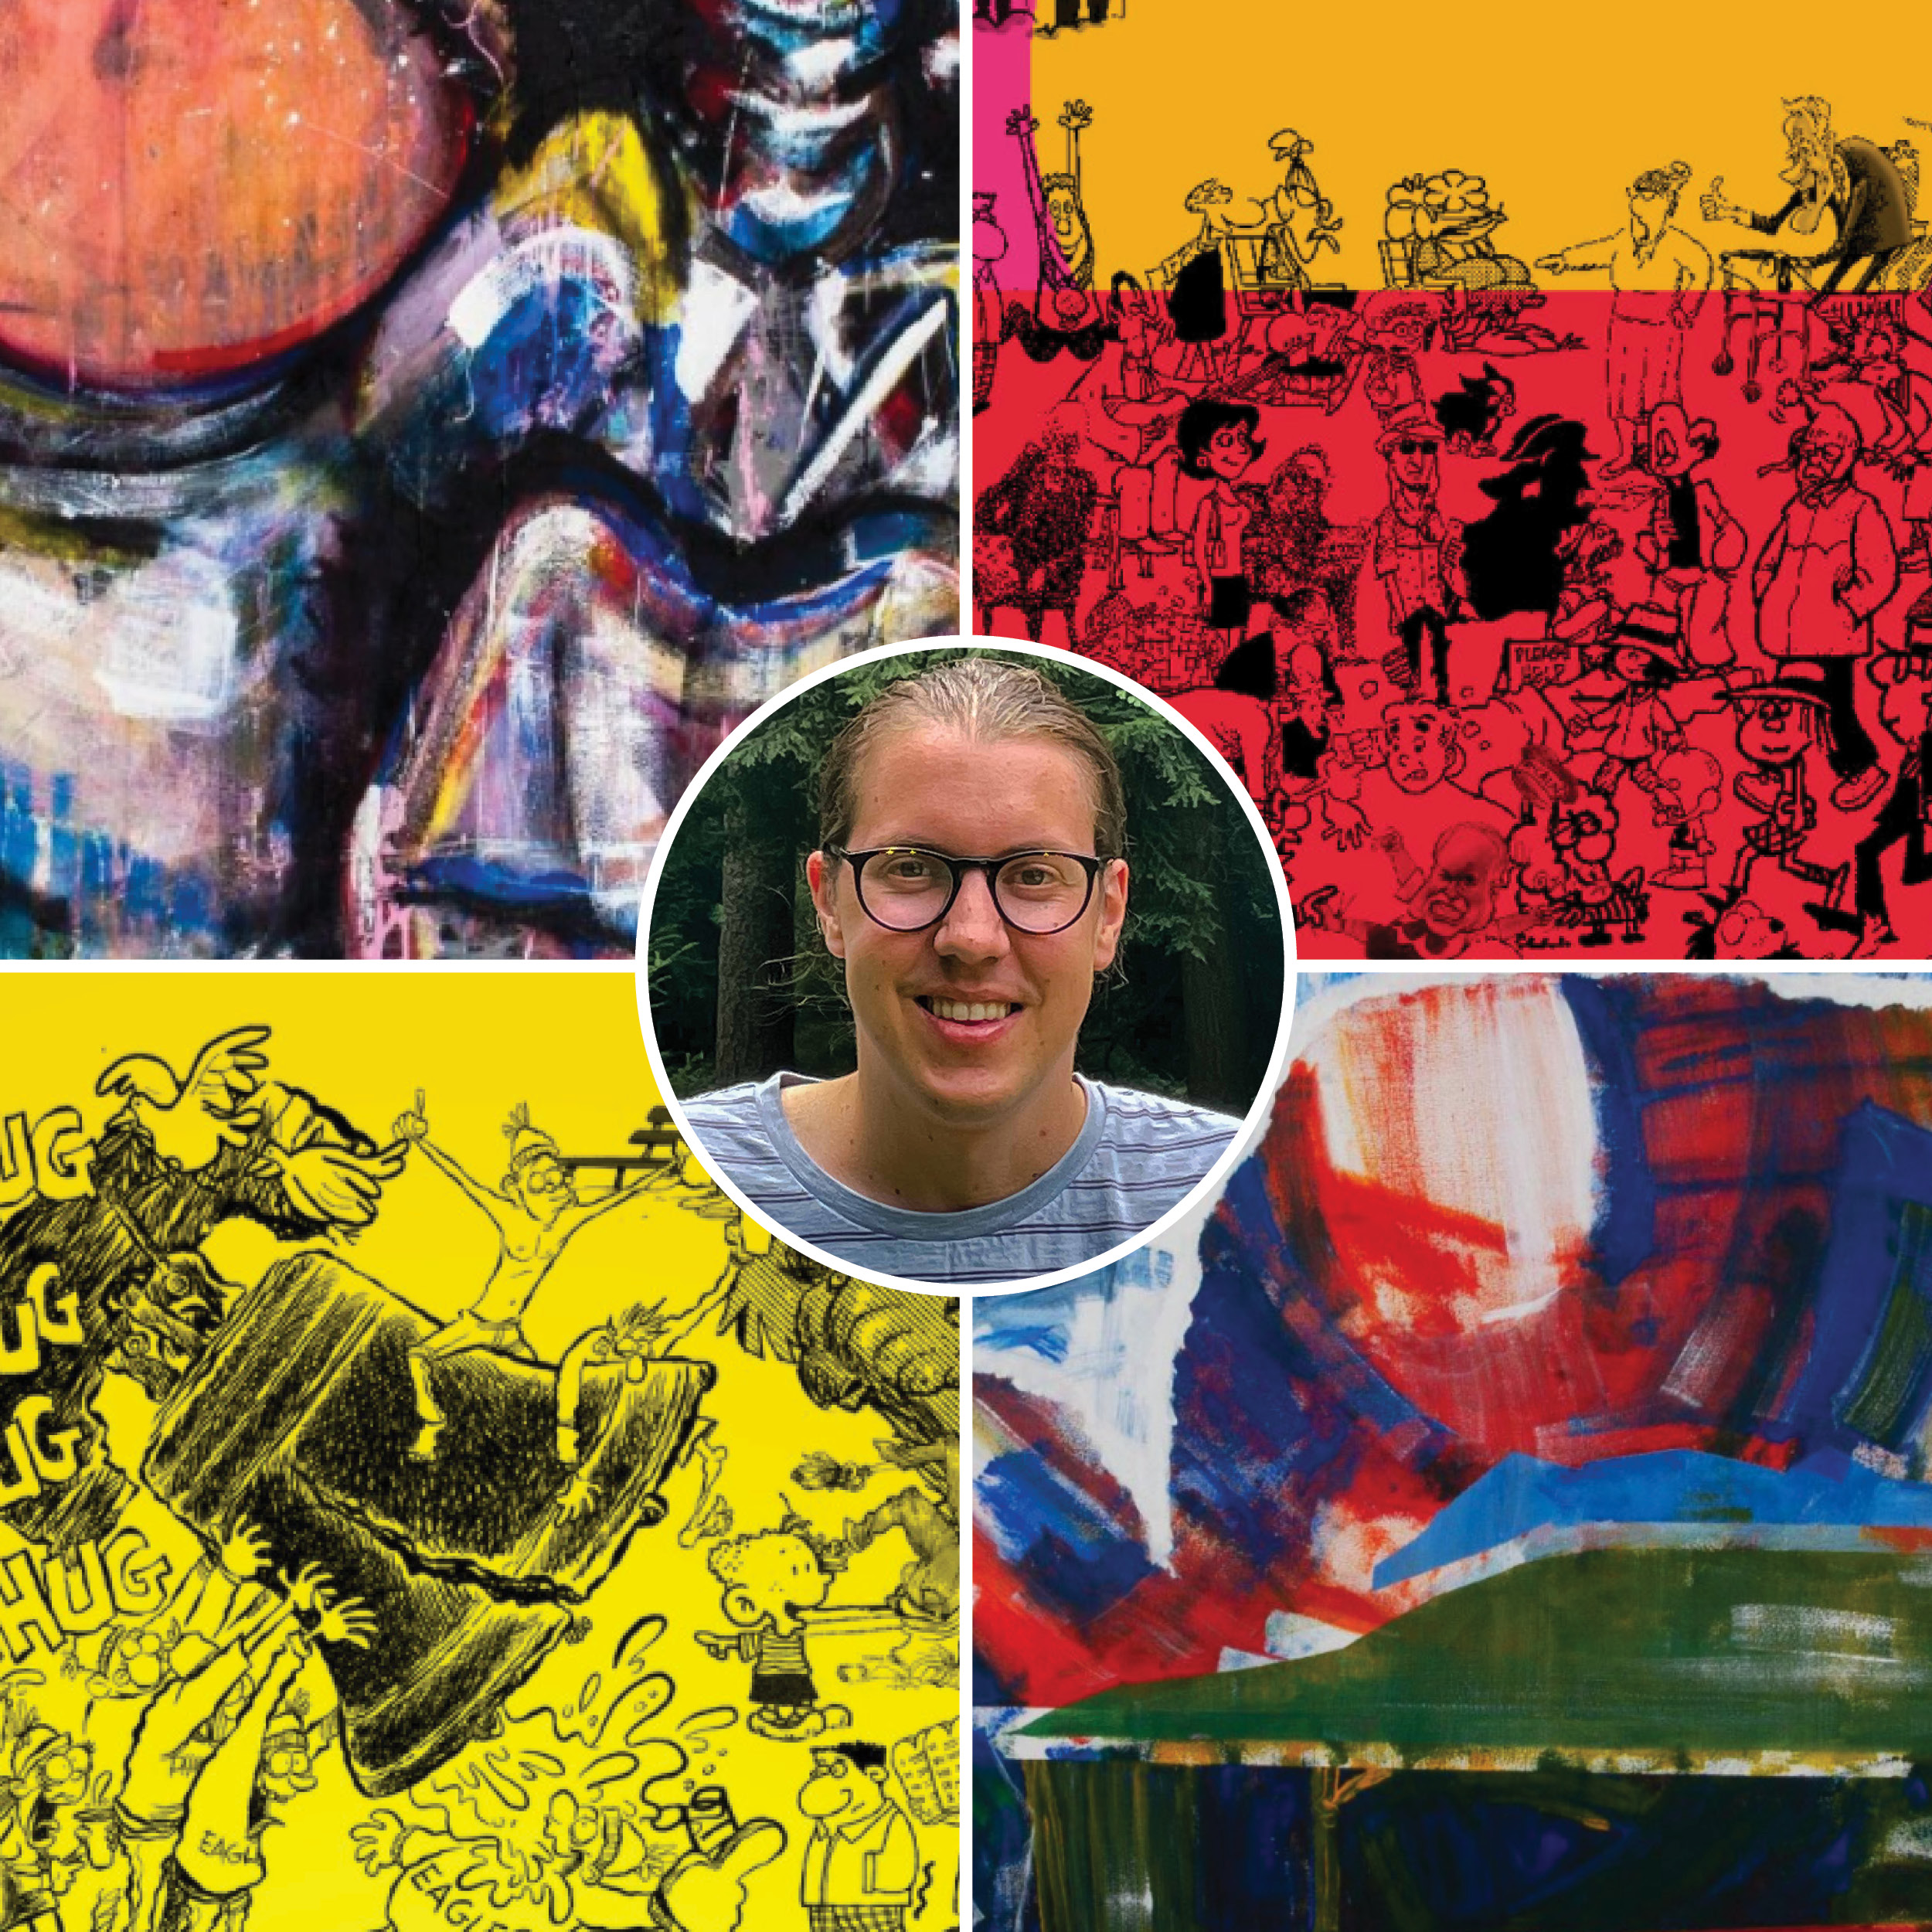 Image of man with glasses; work samples of visual art